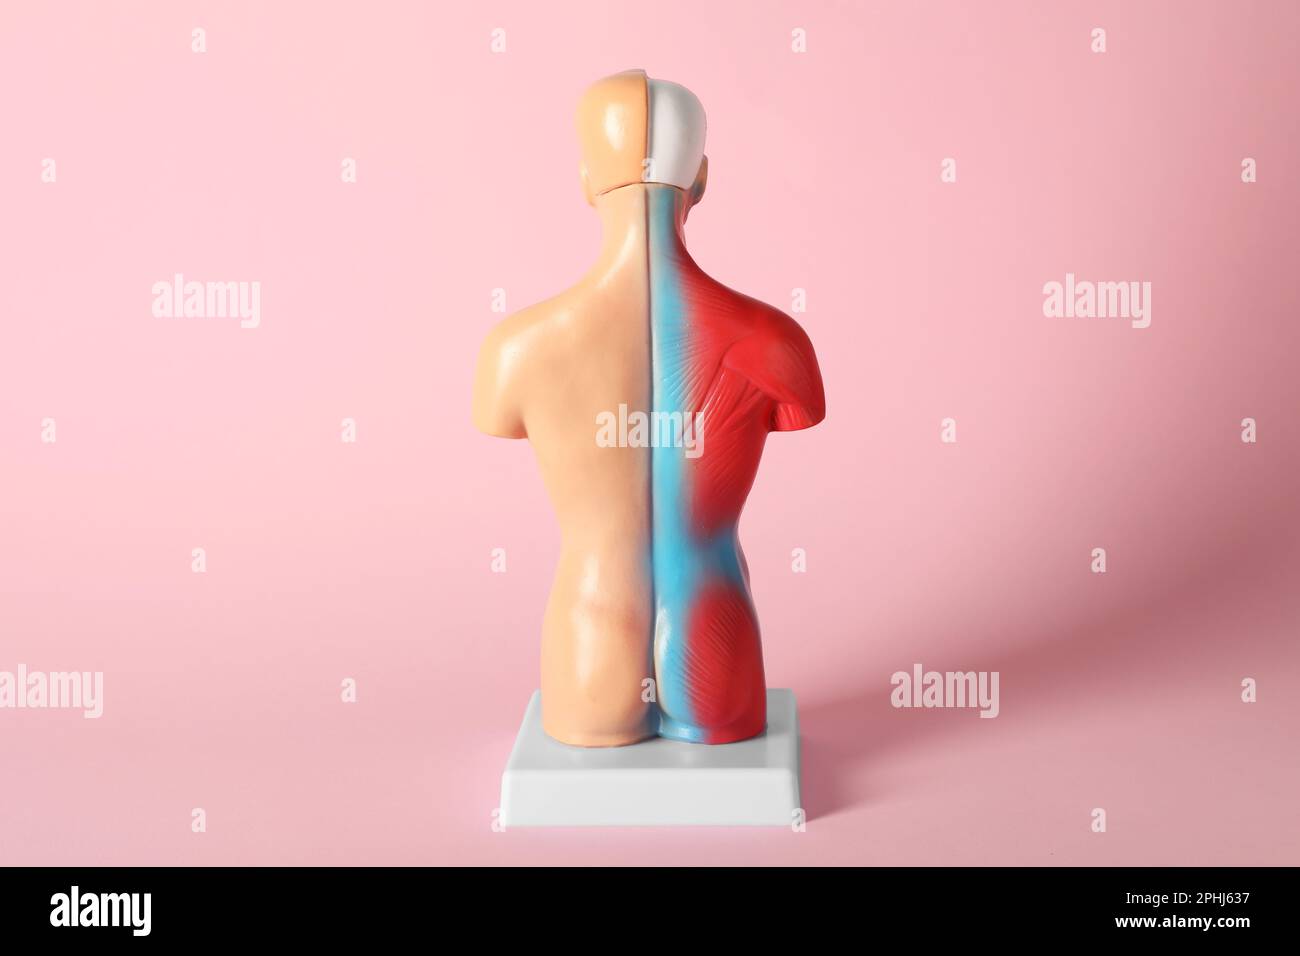 Human anatomy mannequin showing back muscles on pink background Stock Photo